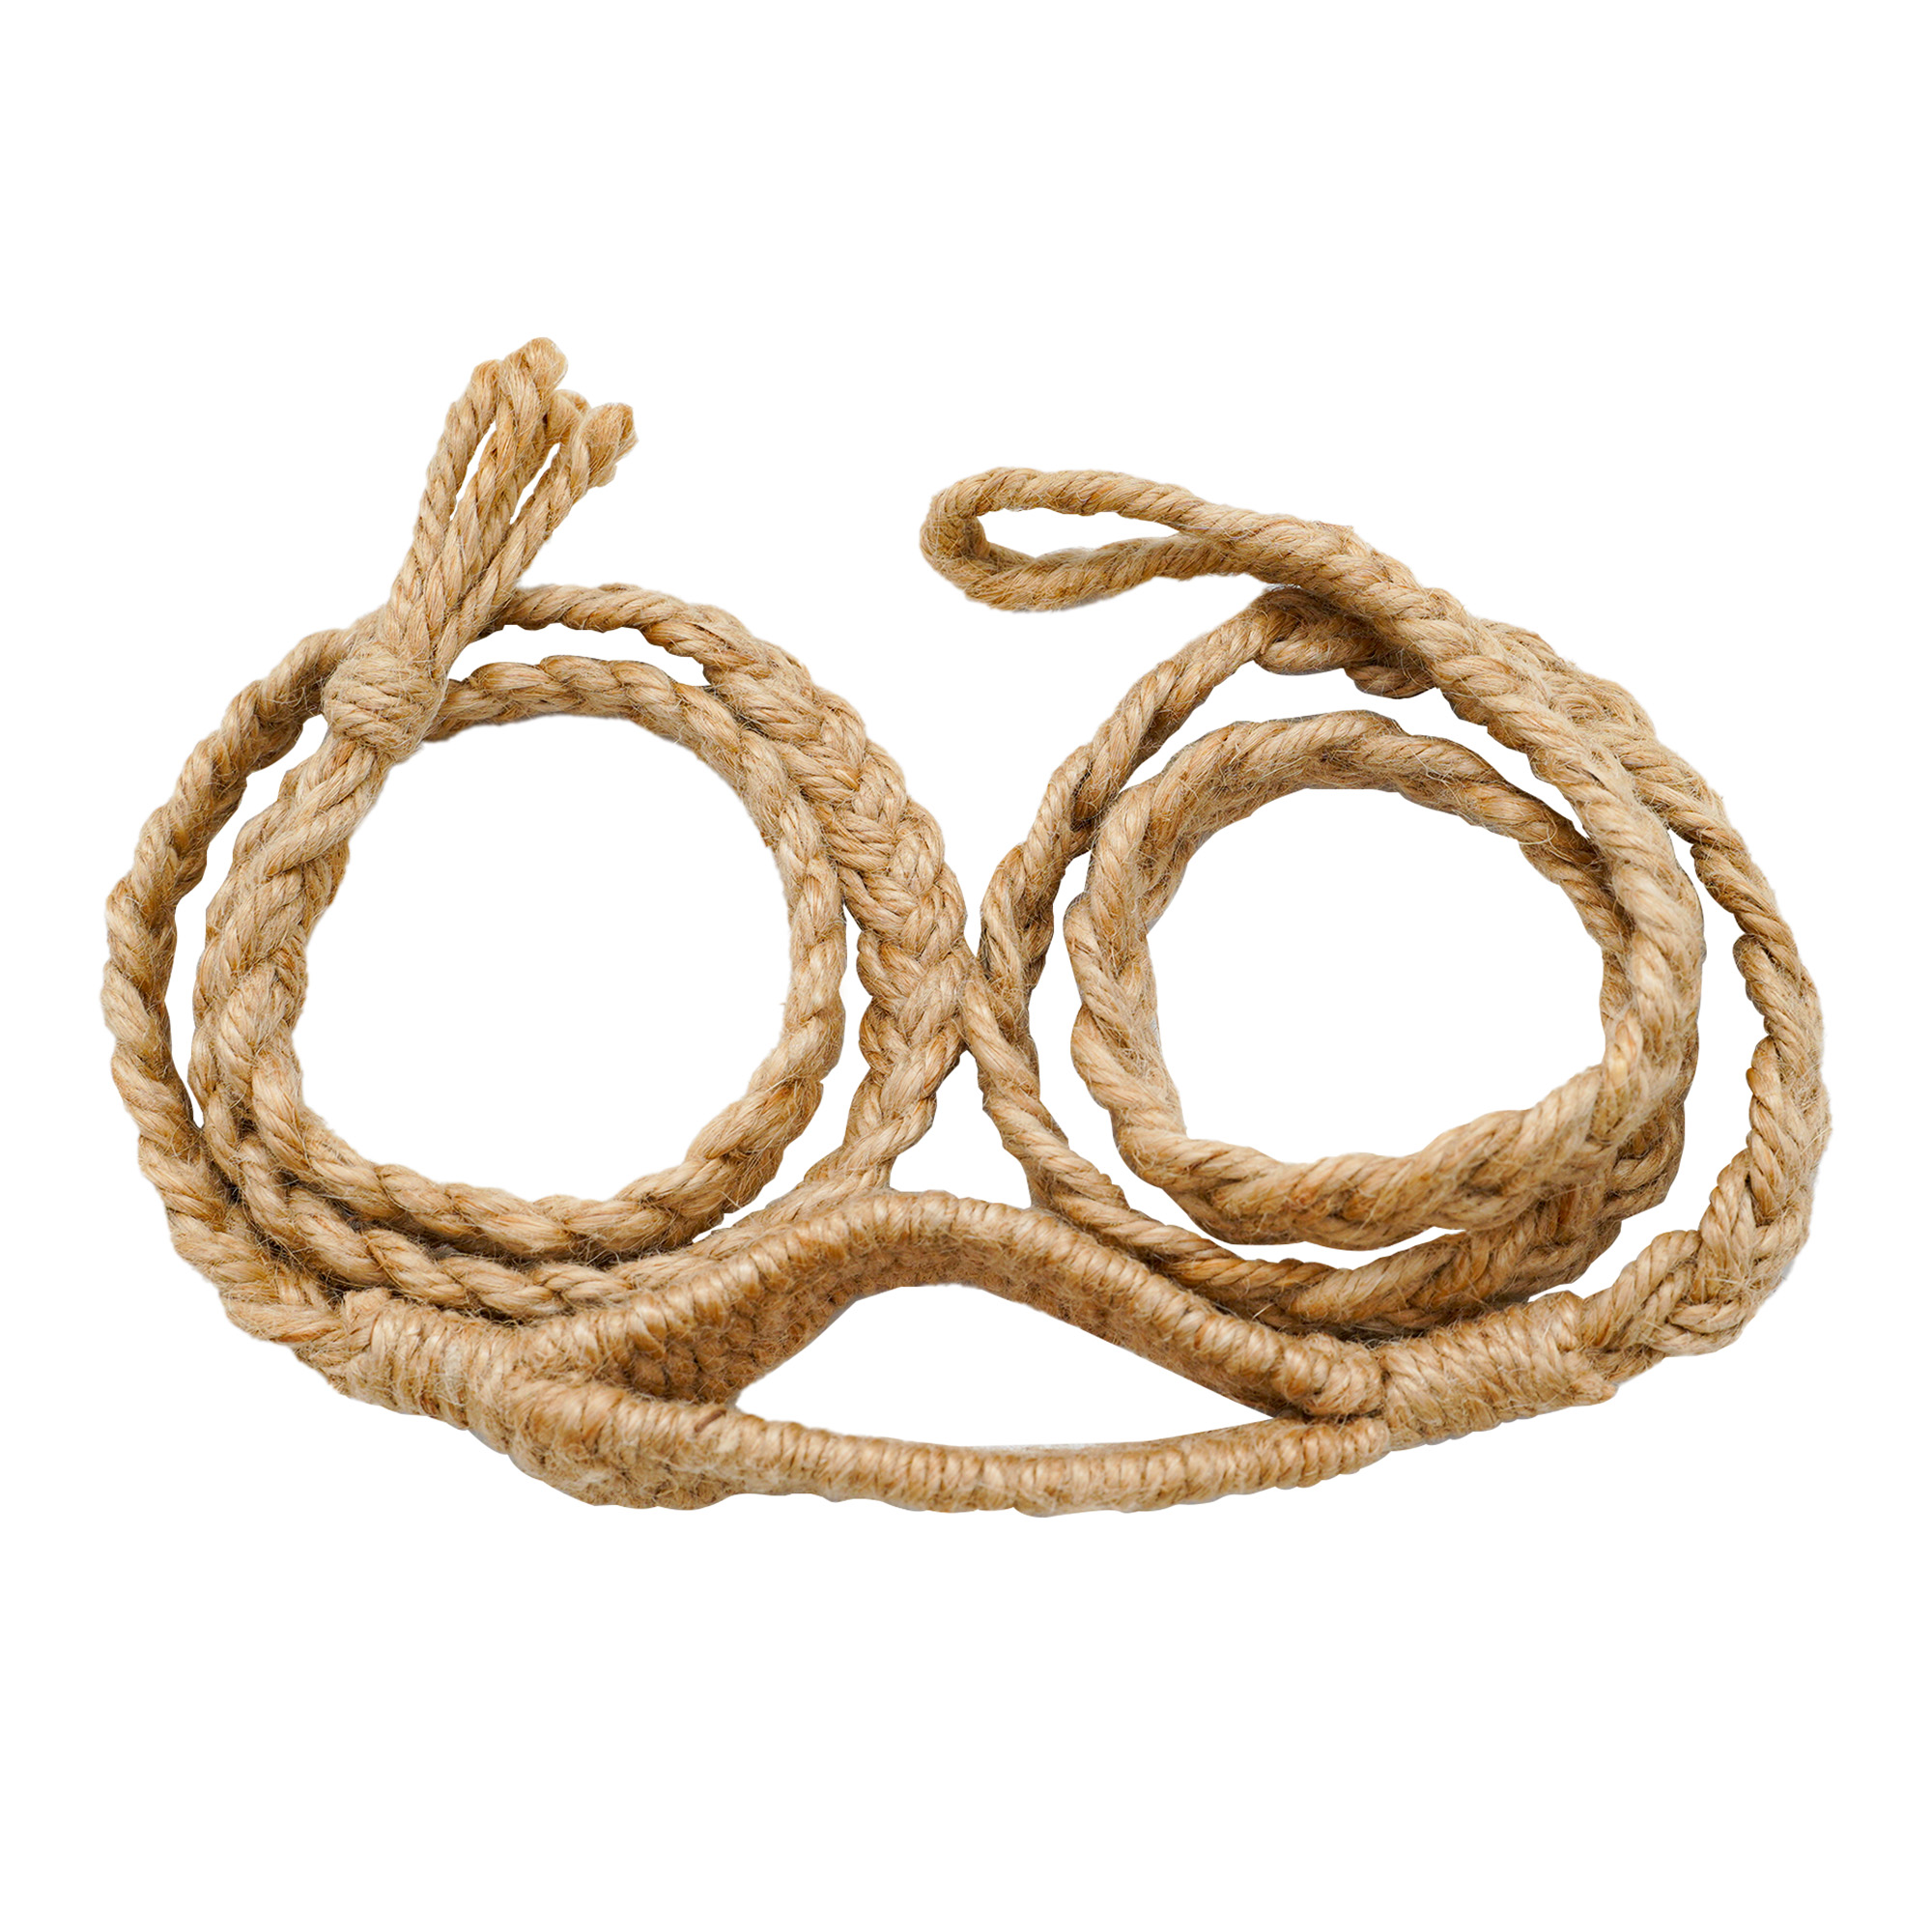 ✨ Historic Balearic Roman Greek Sling Handcrafted Braided Jute Cords -  Medieval Shop at Lord of Battles